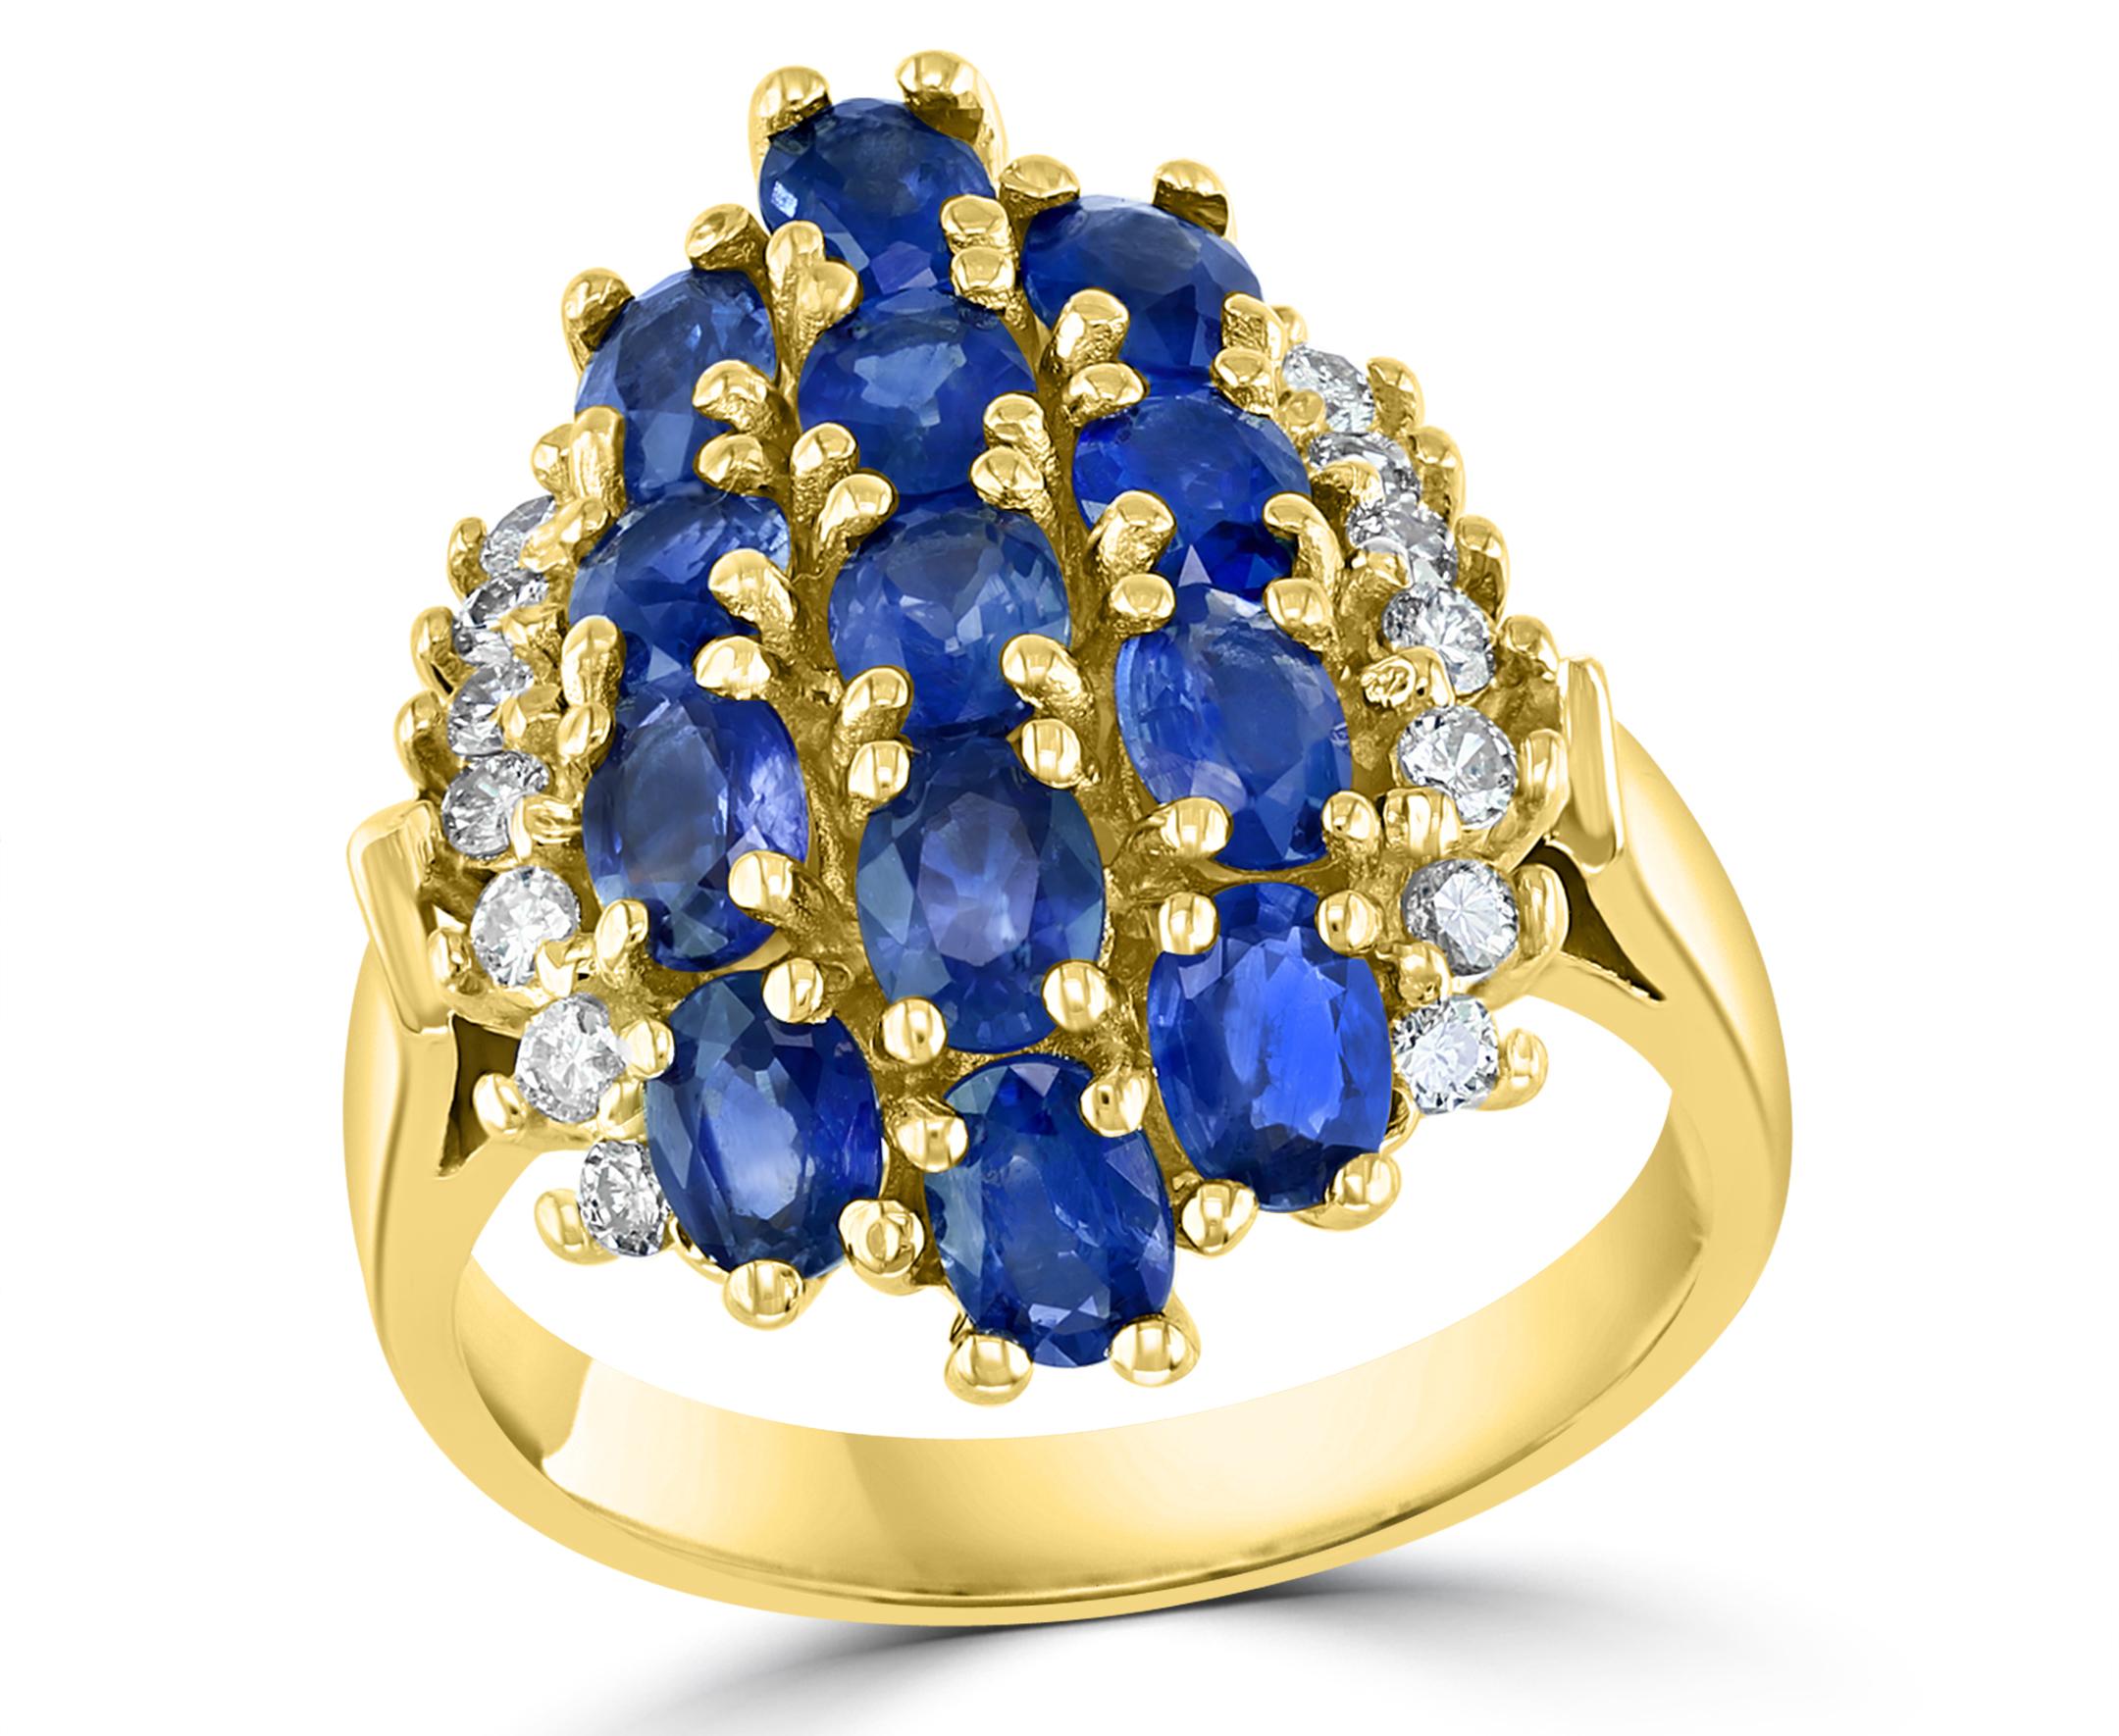 2 Carat Oval Blue Sapphire and Diamond Cocktail Ring in 14 Karat Gold Estate For Sale 13